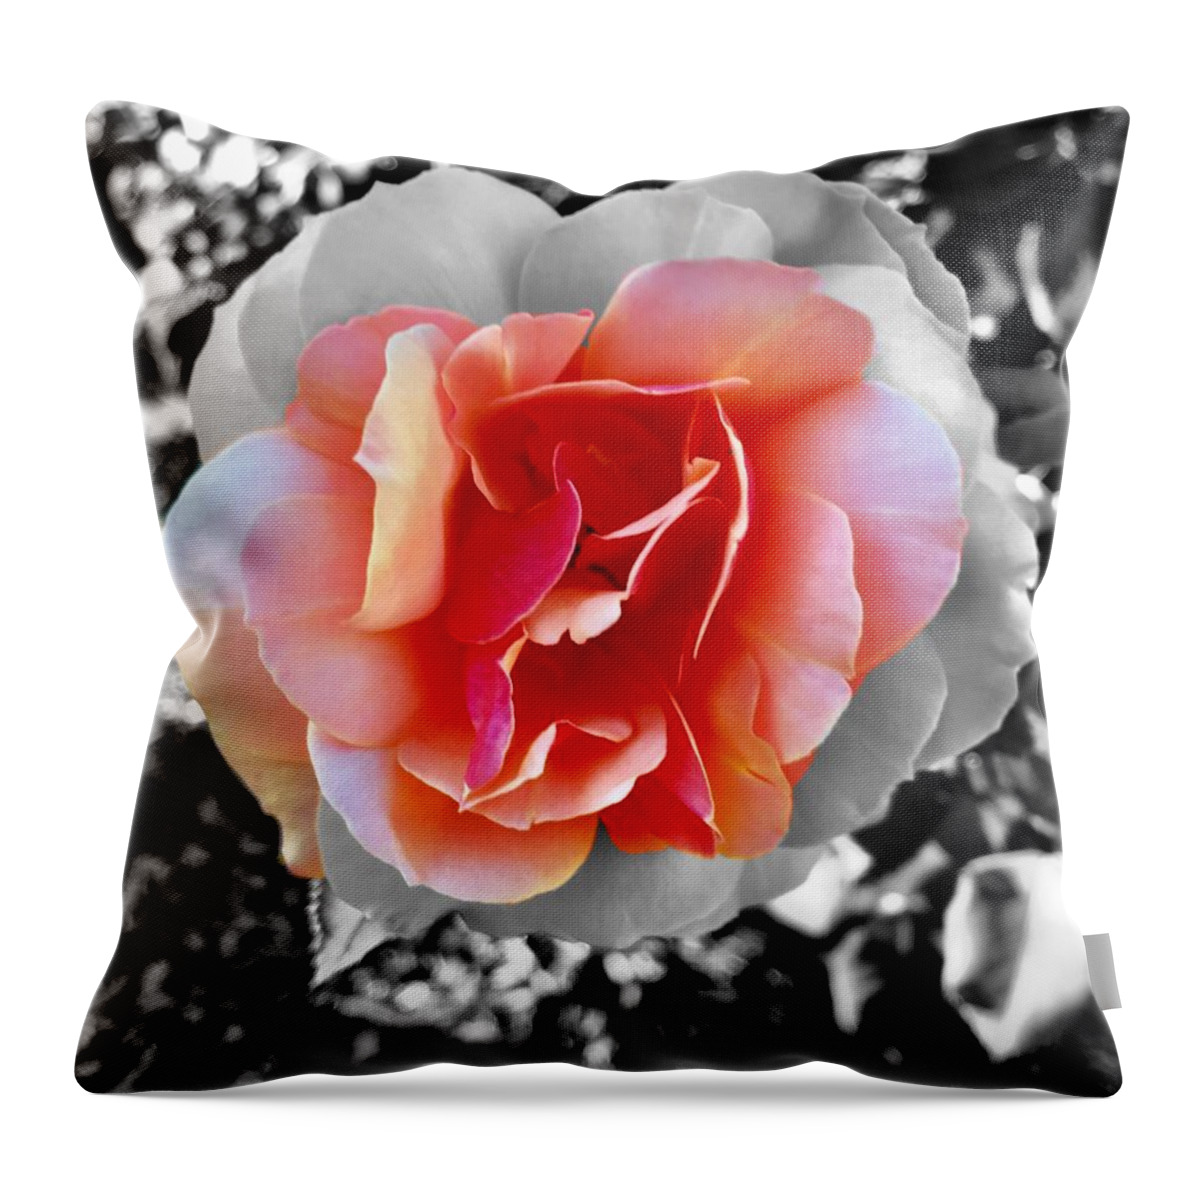 Rose Throw Pillow featuring the photograph Variation by Brad Hodges